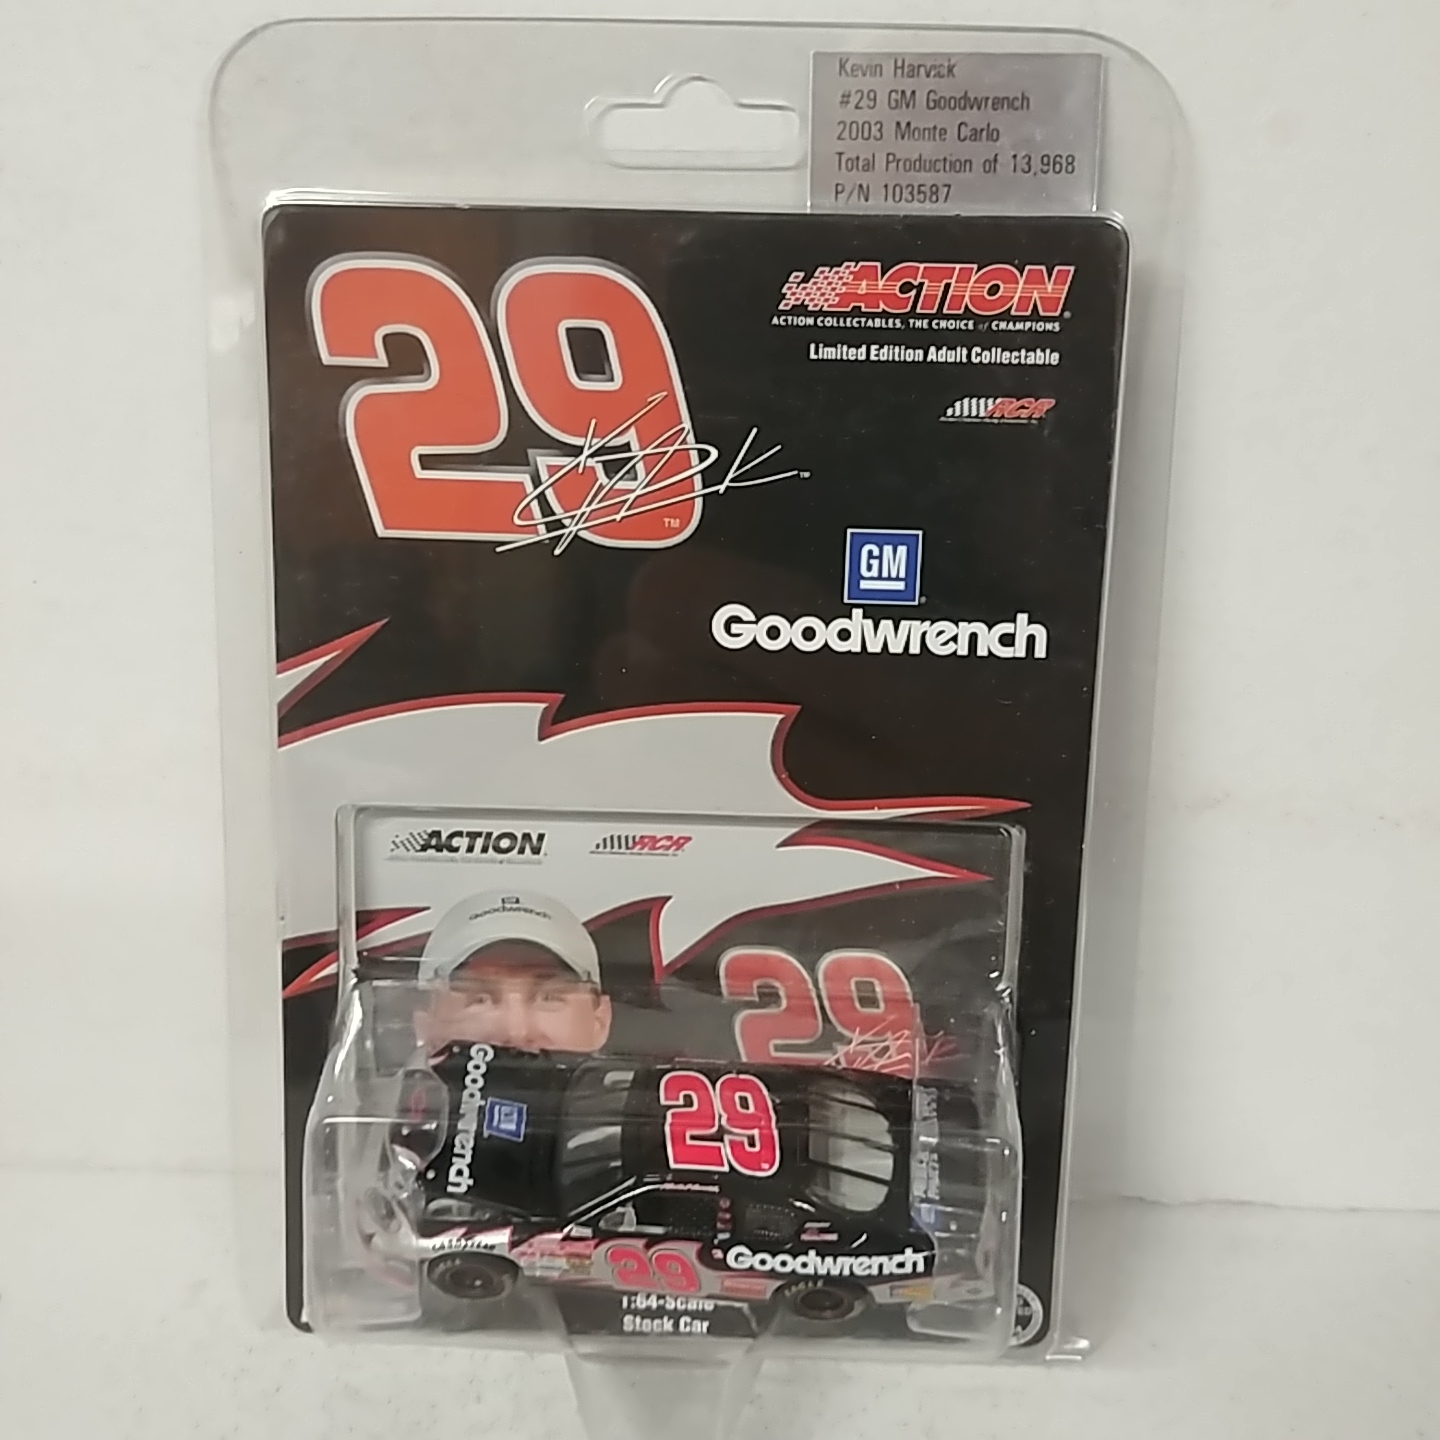 2003 Kevin Harvick 1/64th Goodwrench ARC hood open Monte Carlo